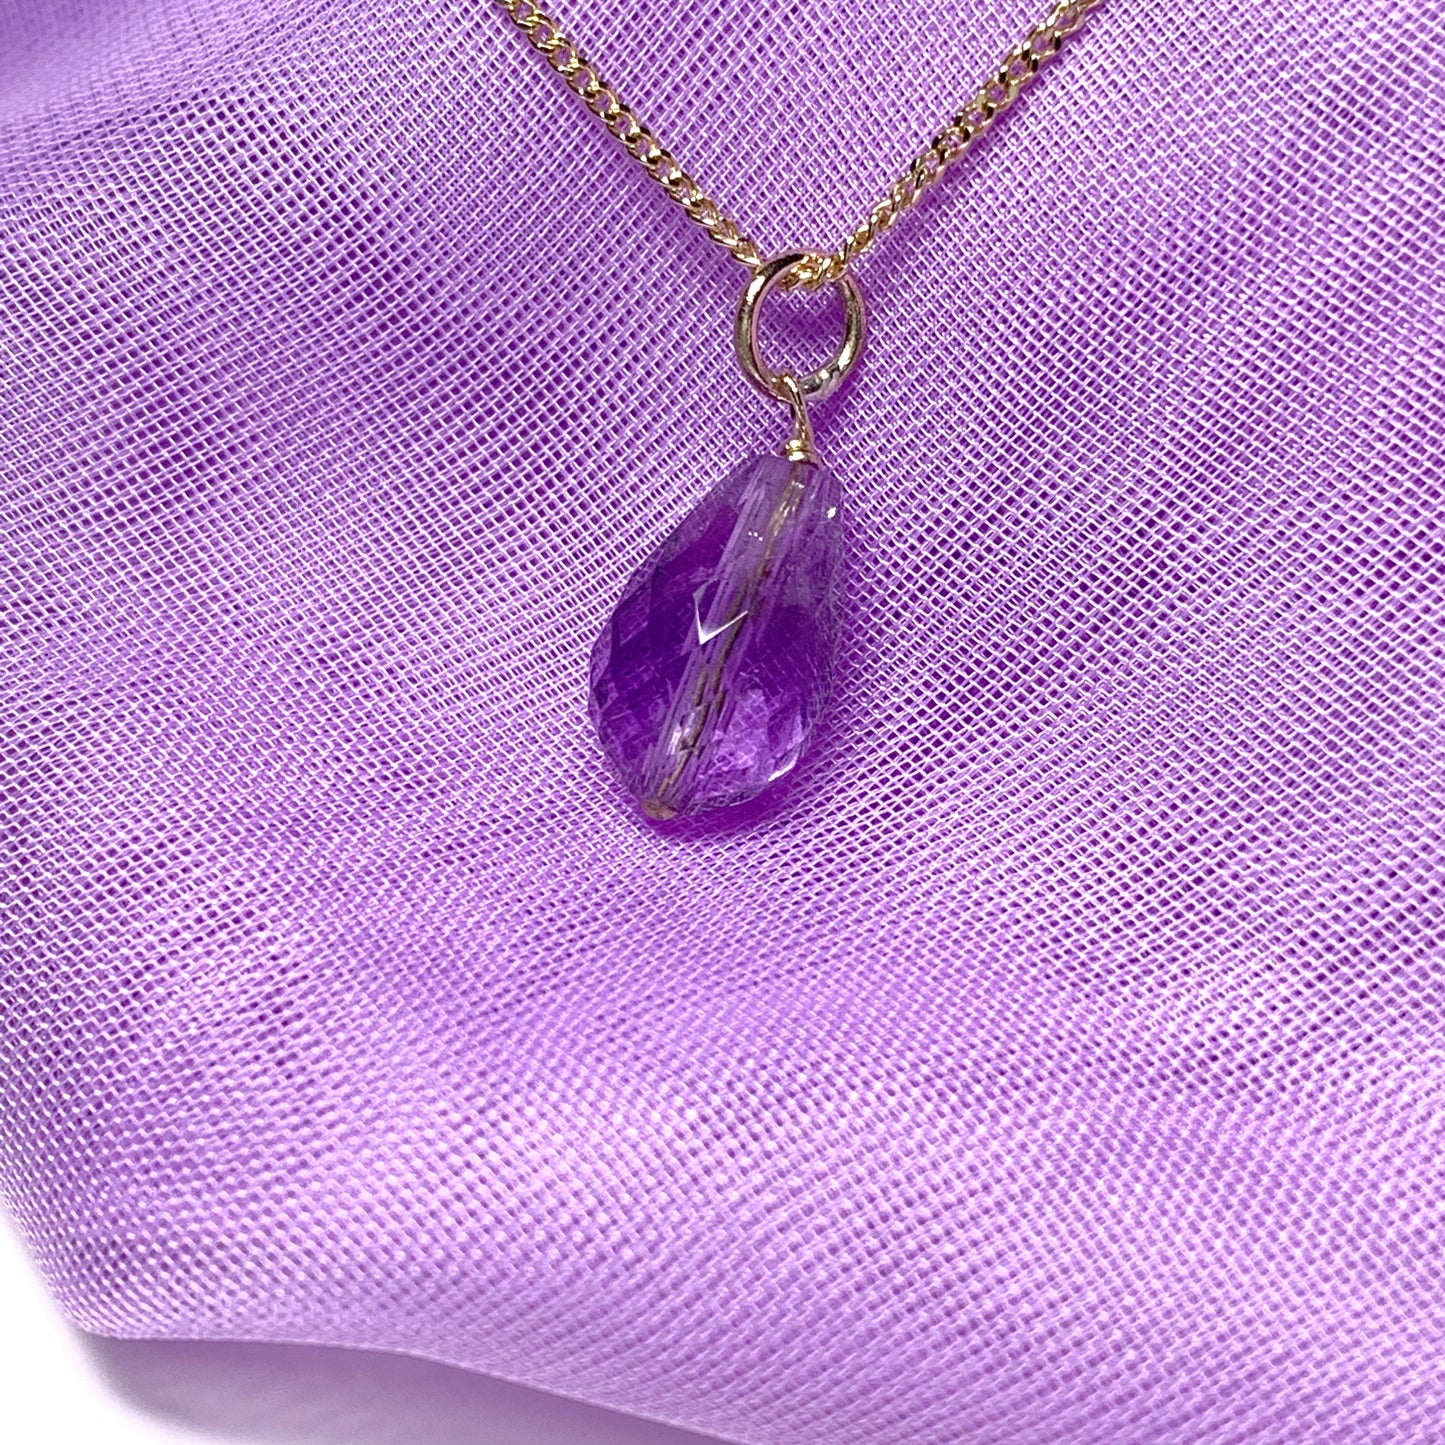 Small Tear Drop Yellow Gold Pear Shaped Amethyst Necklace Pendent